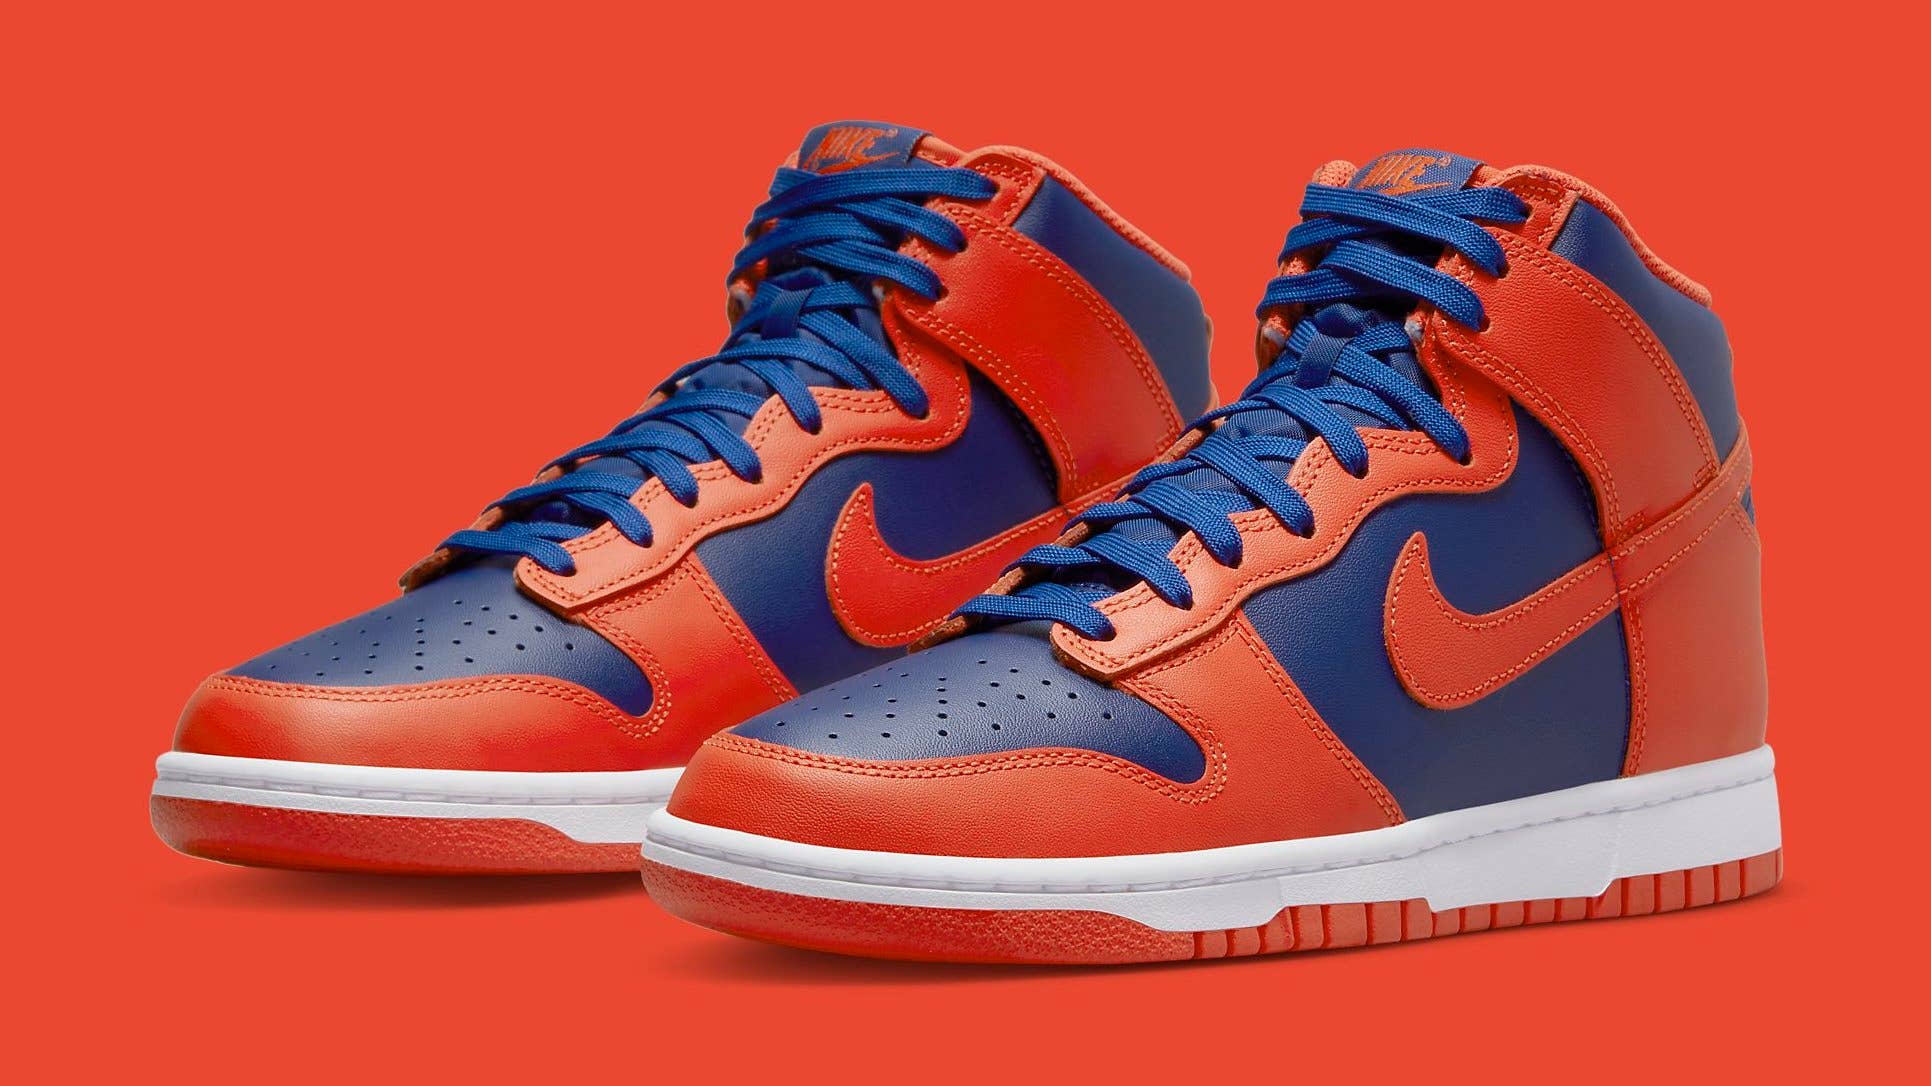 Nike Dresses This Dunk In New York Knicks Colors